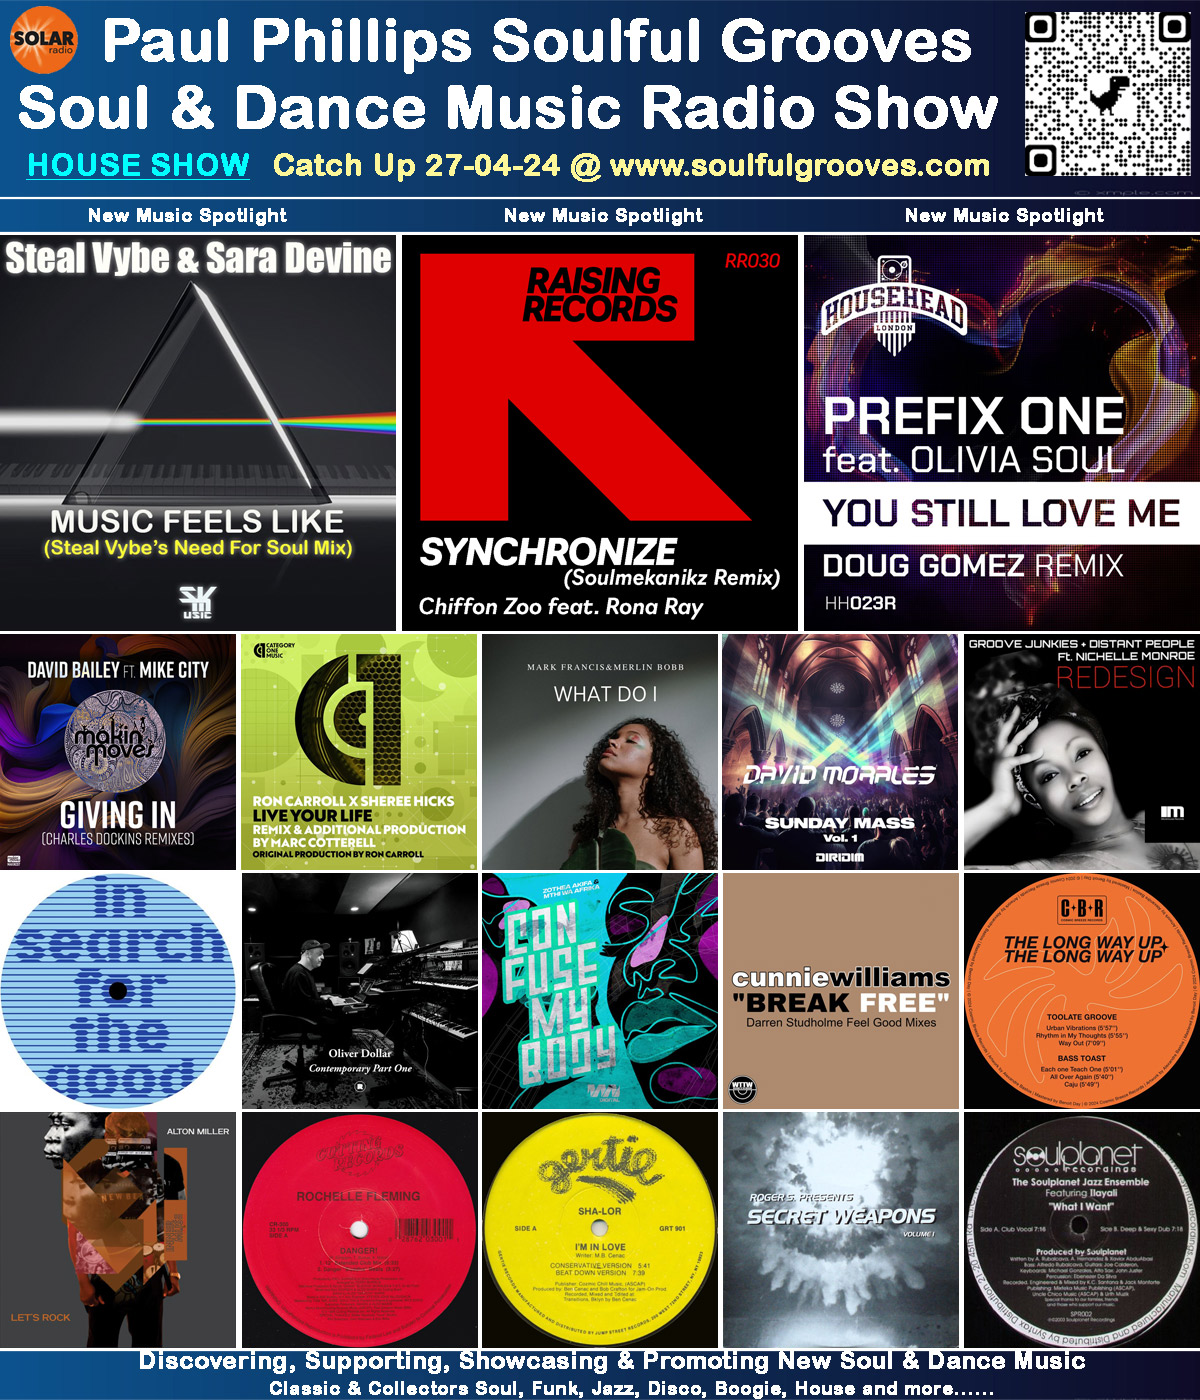 Paul Phillips Soulful Grooves Solar Radio House Music Show Playlist playing soulful house, deep house, classic house